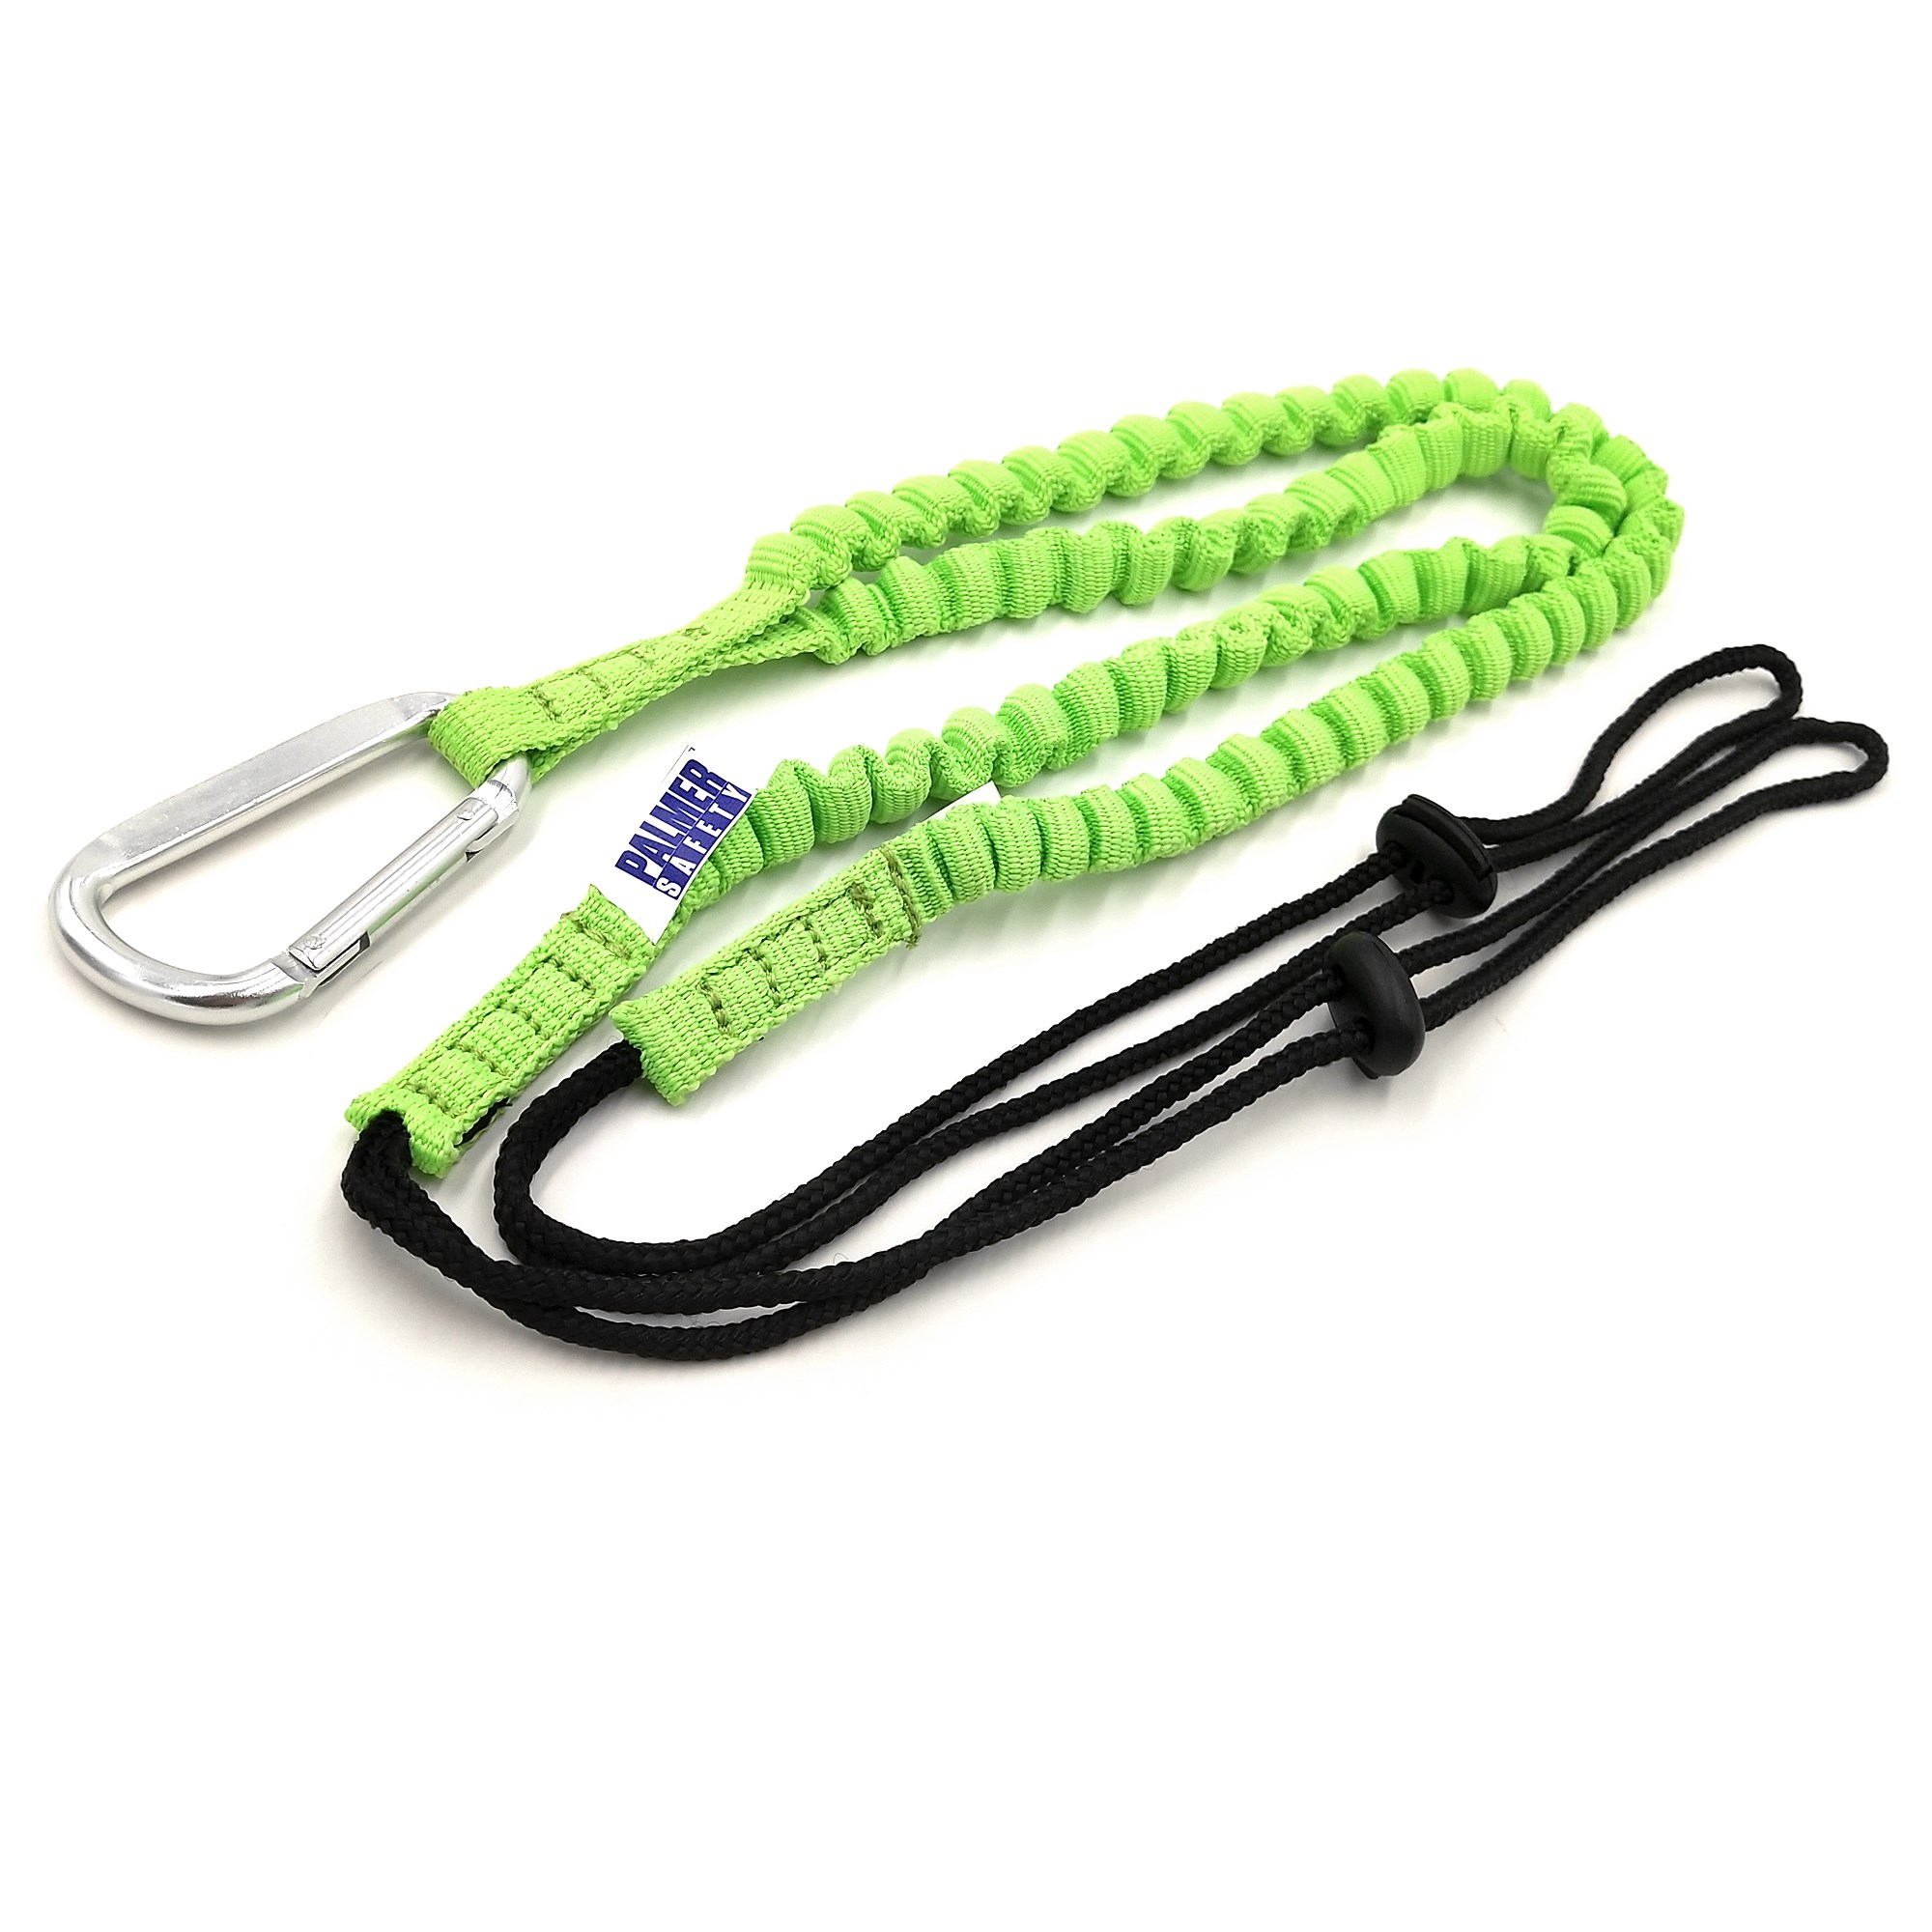 Good Quality Tool Lanyard - 2020 New Coming Hot Sale Best Quality Retractable Tool Lanyard with Carabiner – Bison